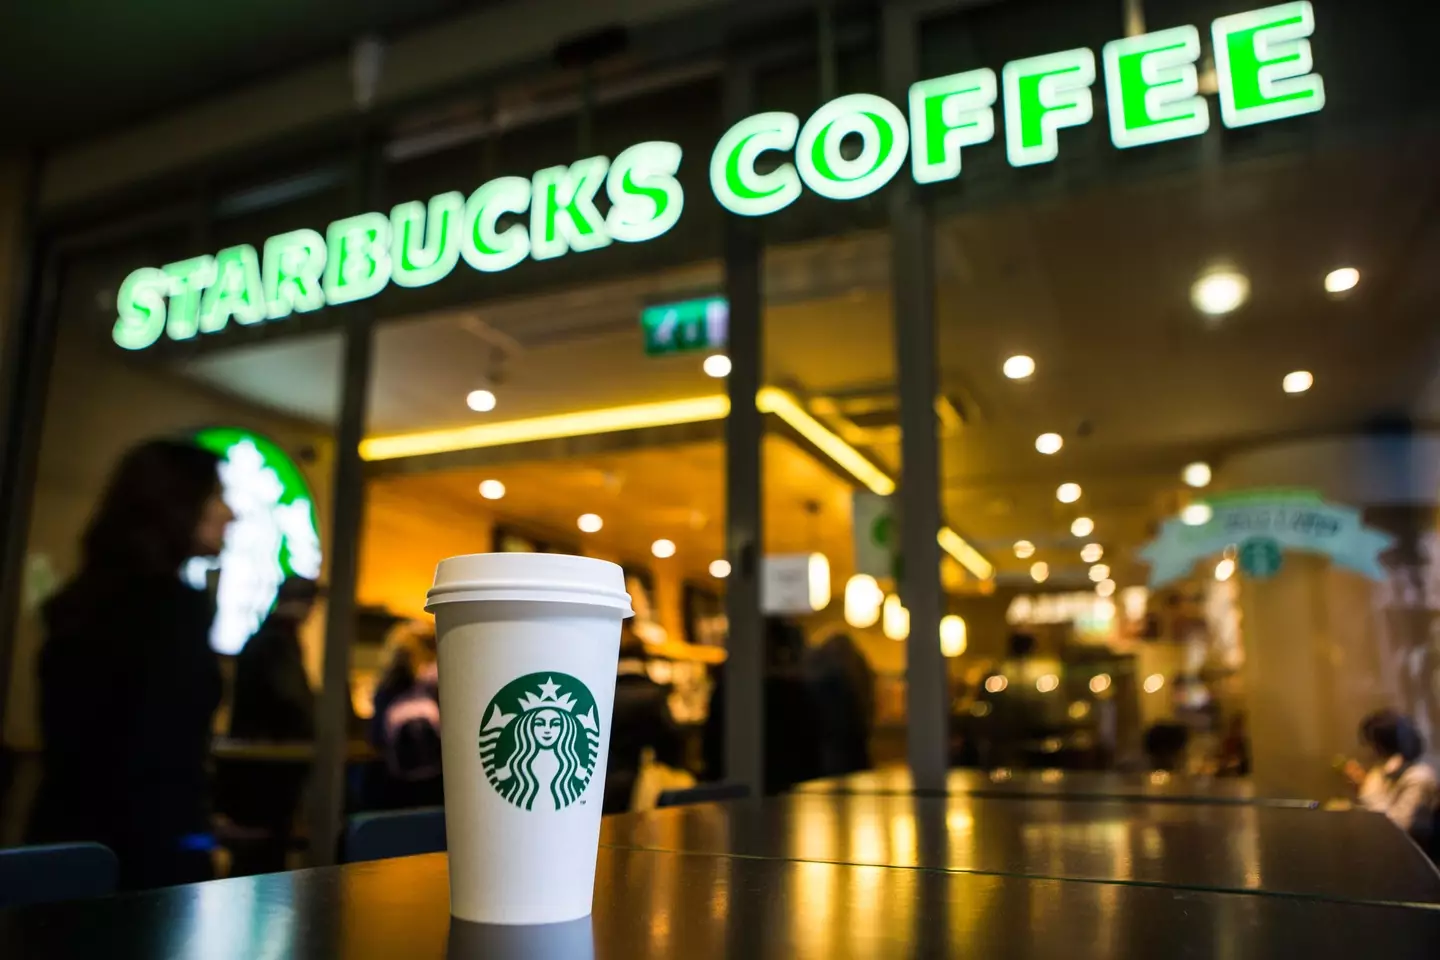 Starbucks was ordered to pay $25 million in damages.